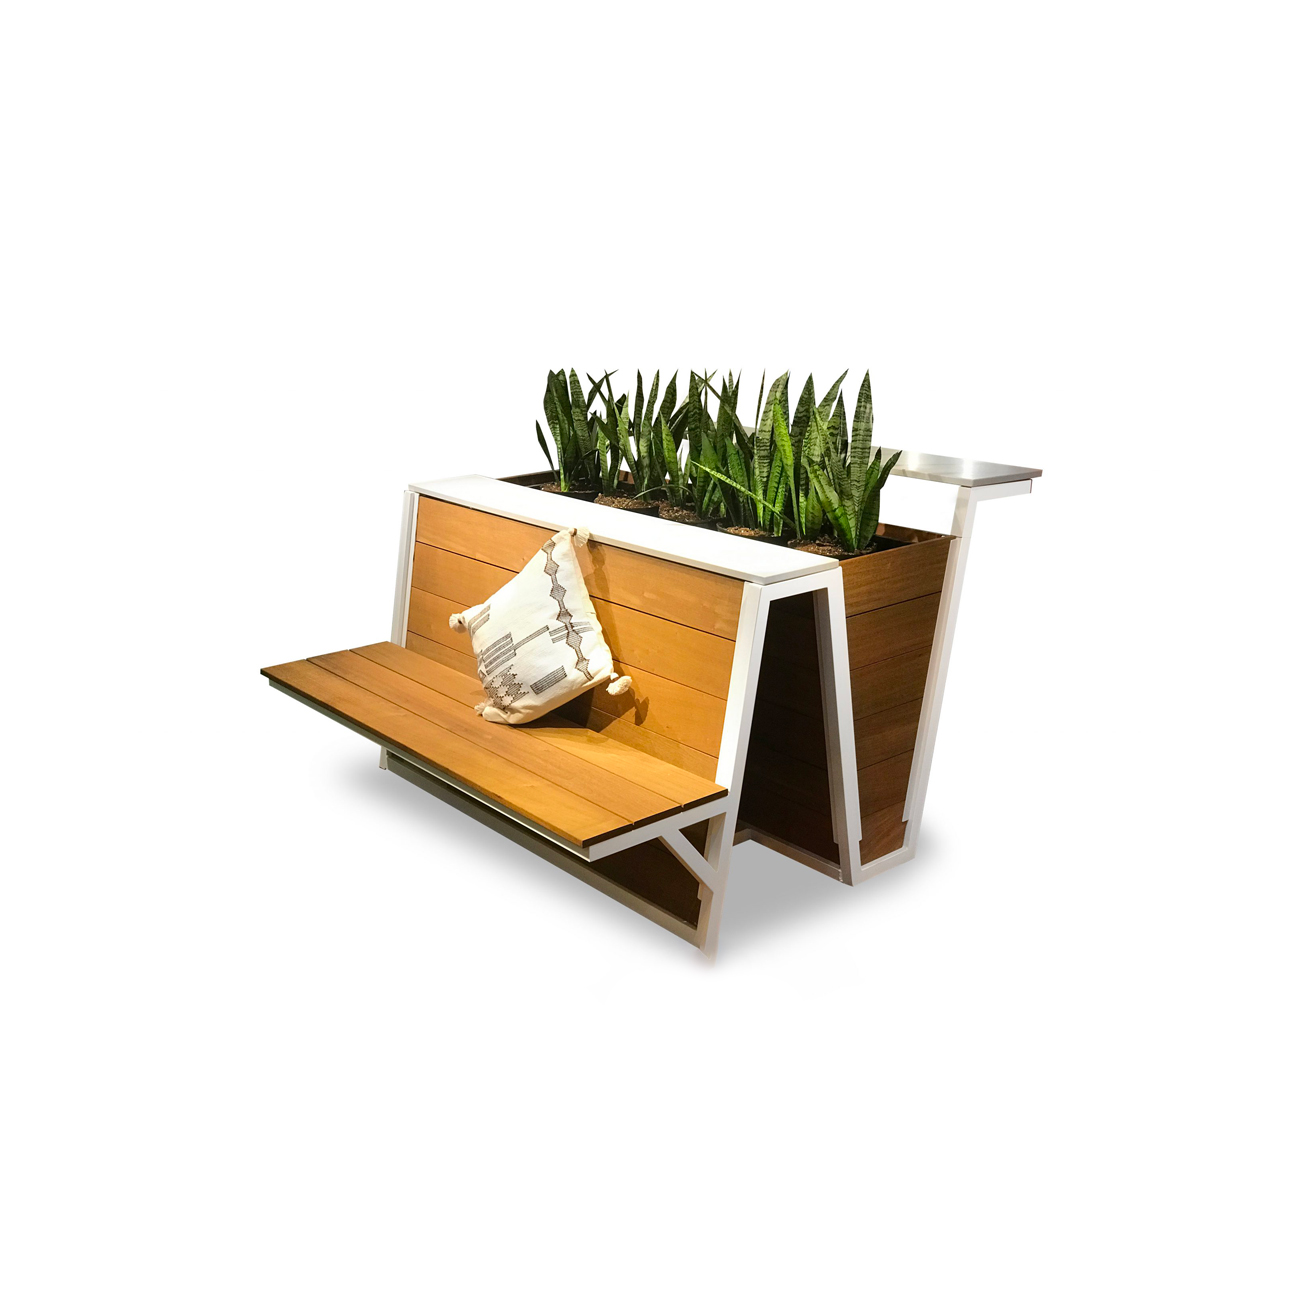 formaspace zigzag bench table planter